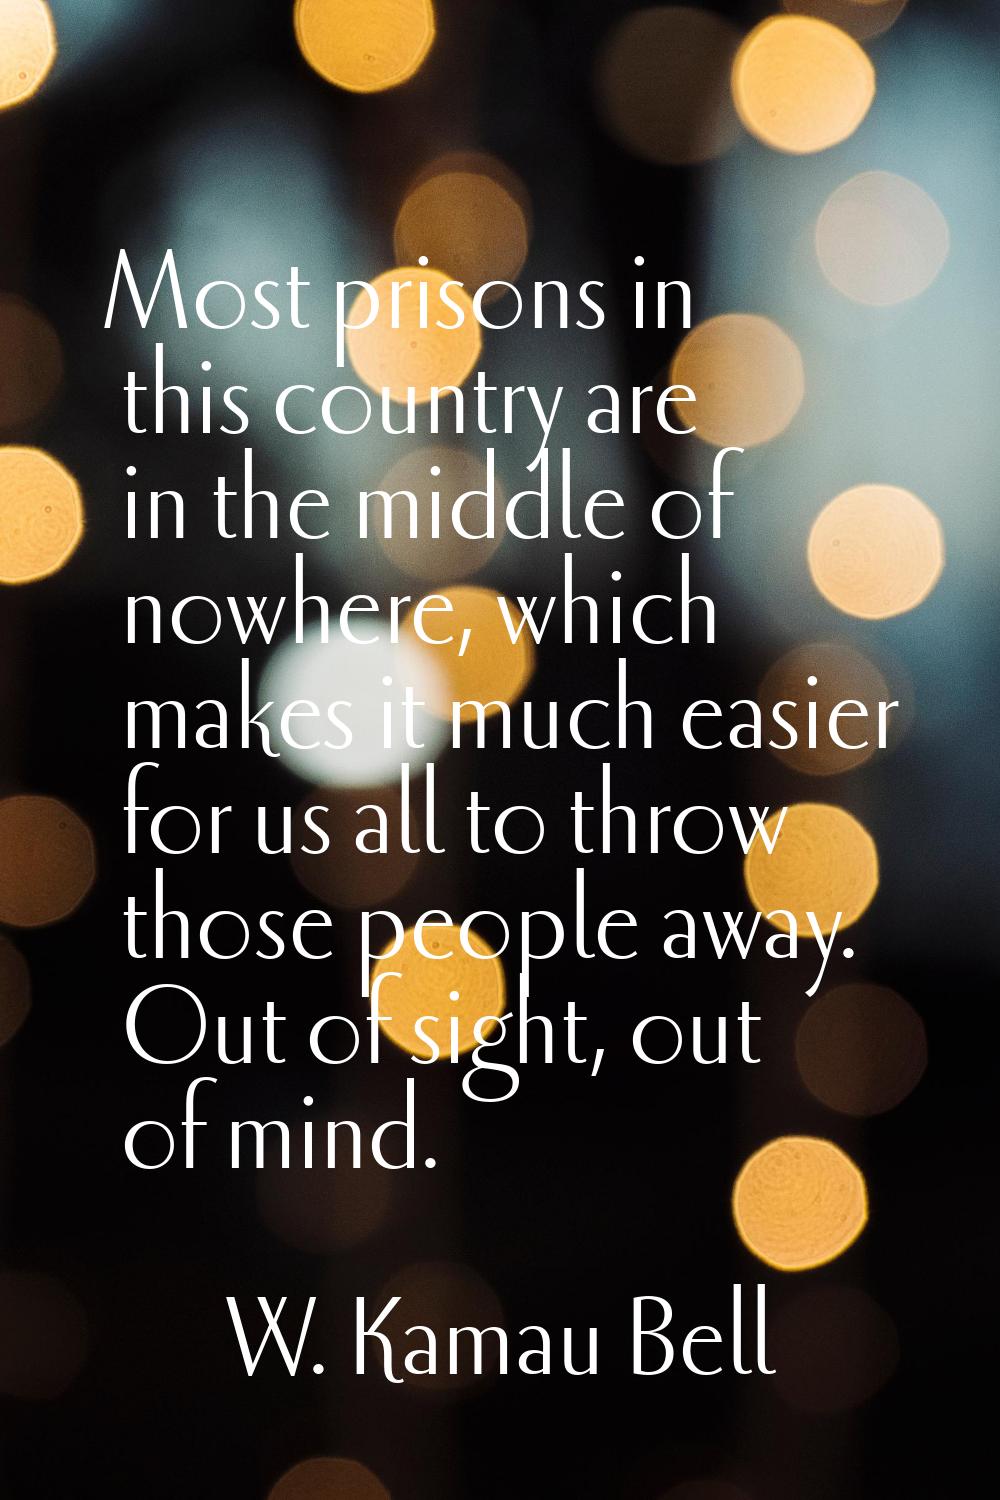 Most prisons in this country are in the middle of nowhere, which makes it much easier for us all to